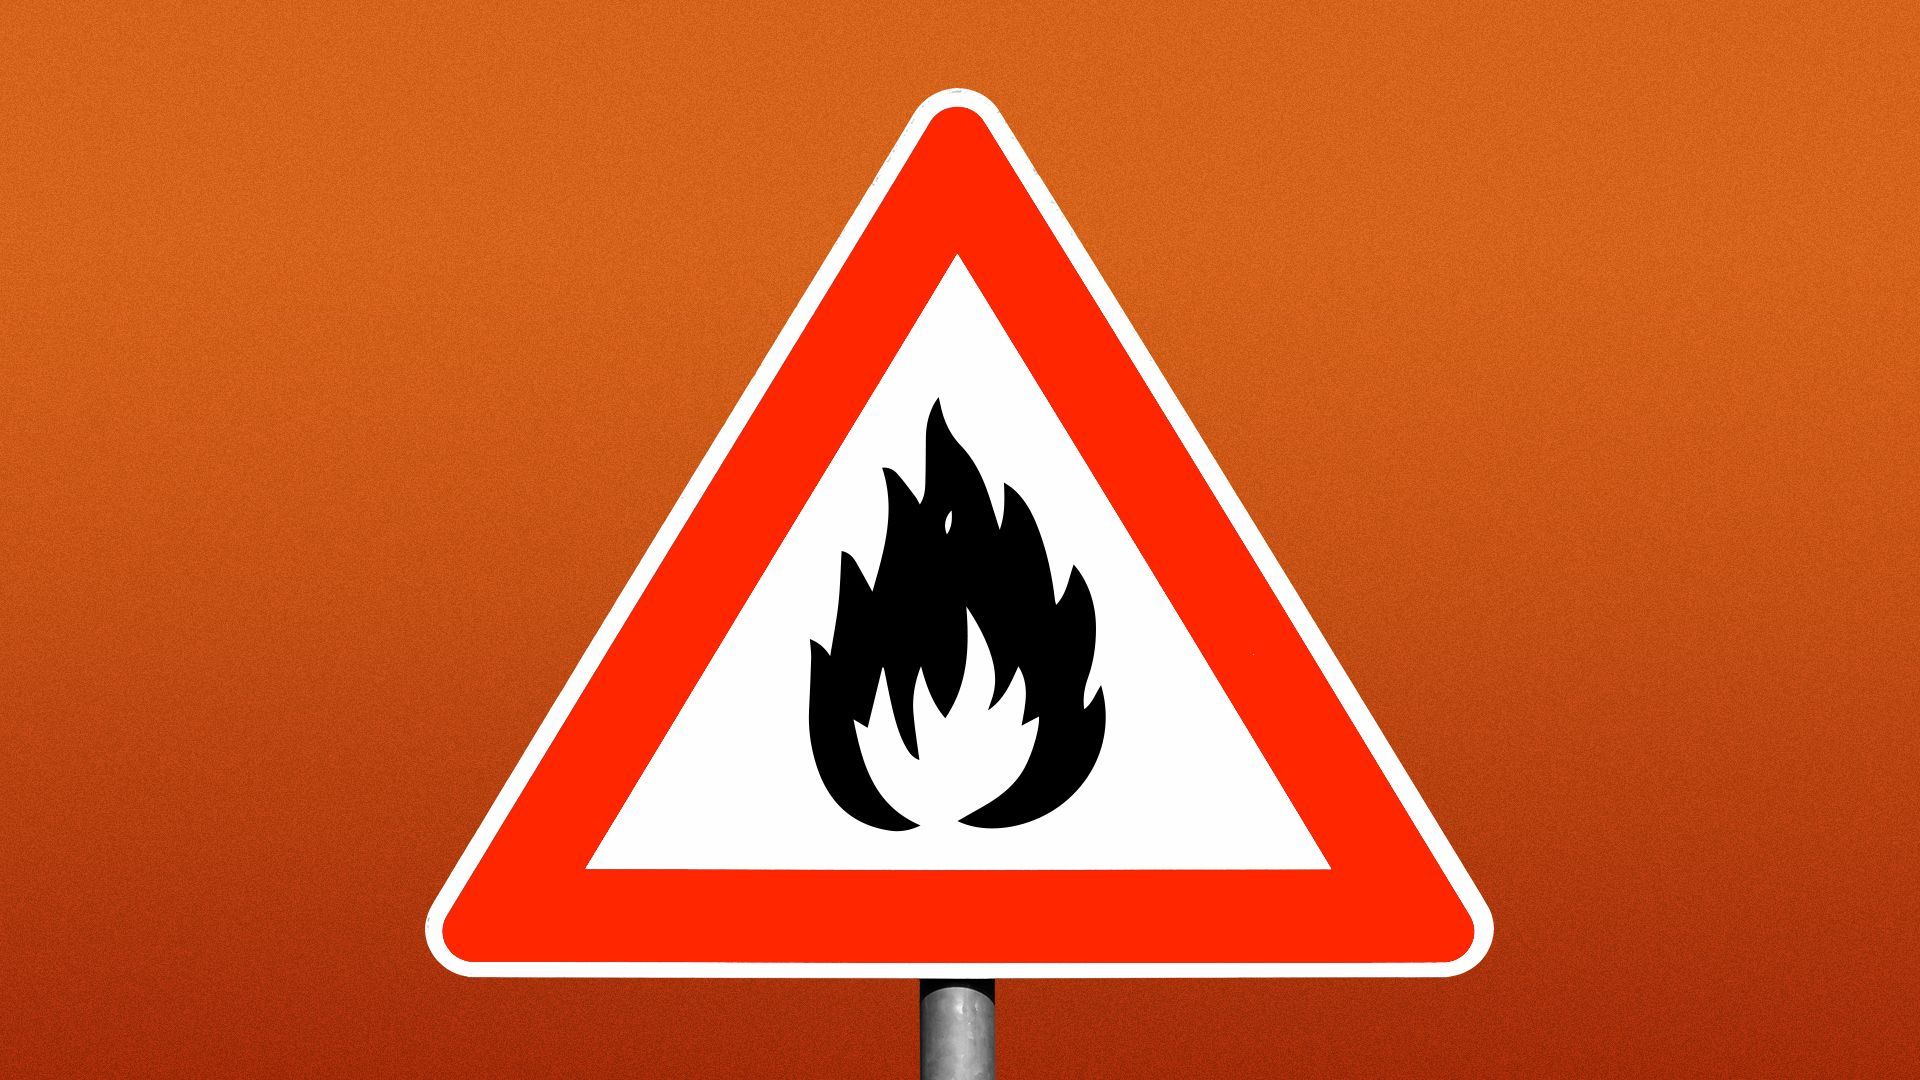 Illustration of a fire graphic on a caution street sign.